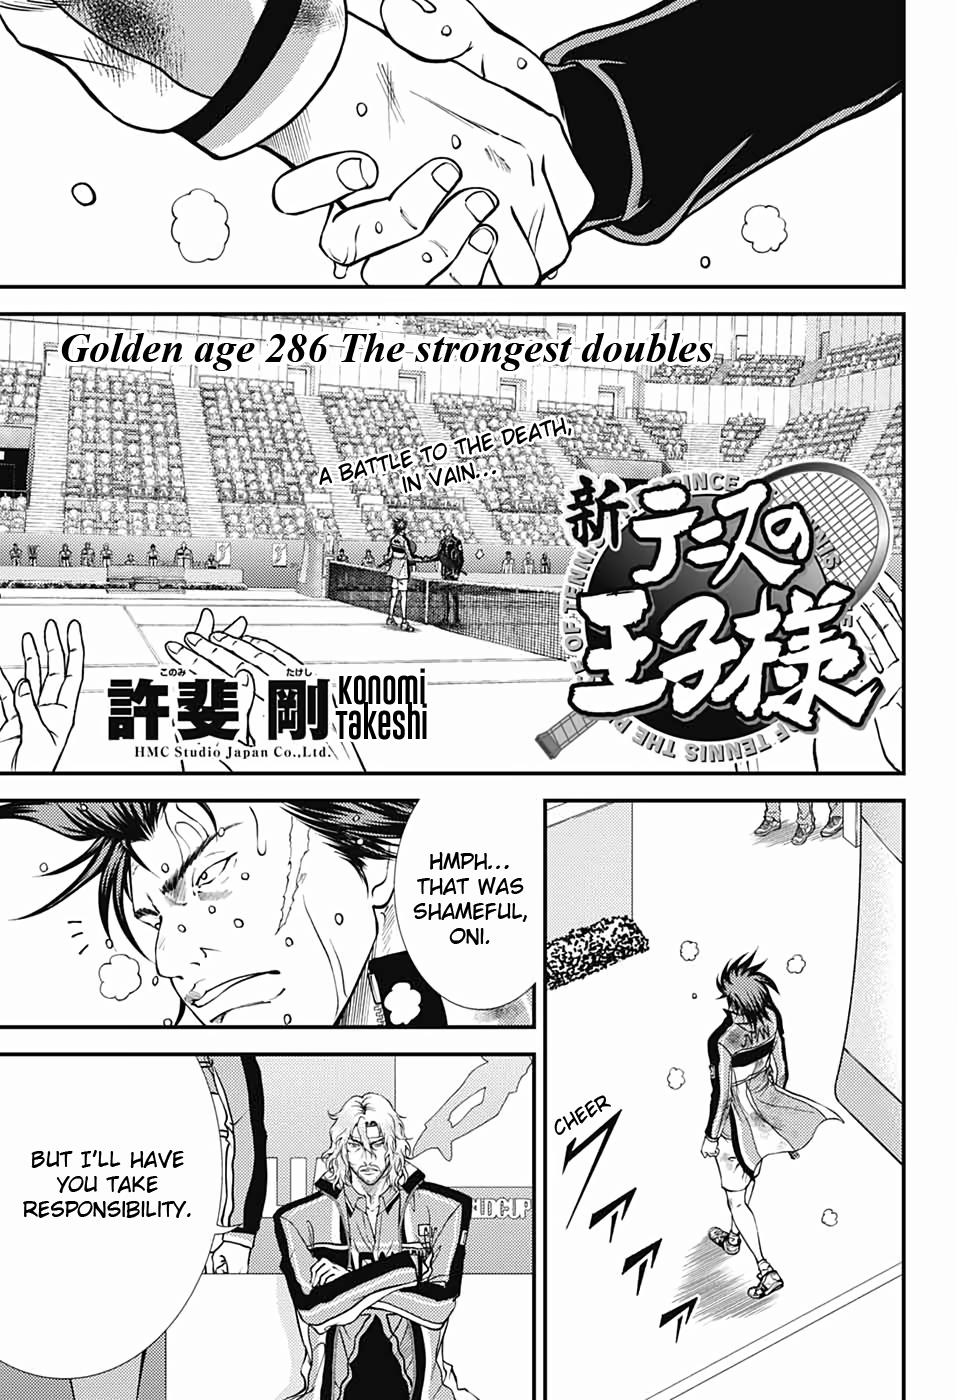 New Prince Of Tennis Vol.29 Chapter 286: The Strongest Doubles - Picture 1